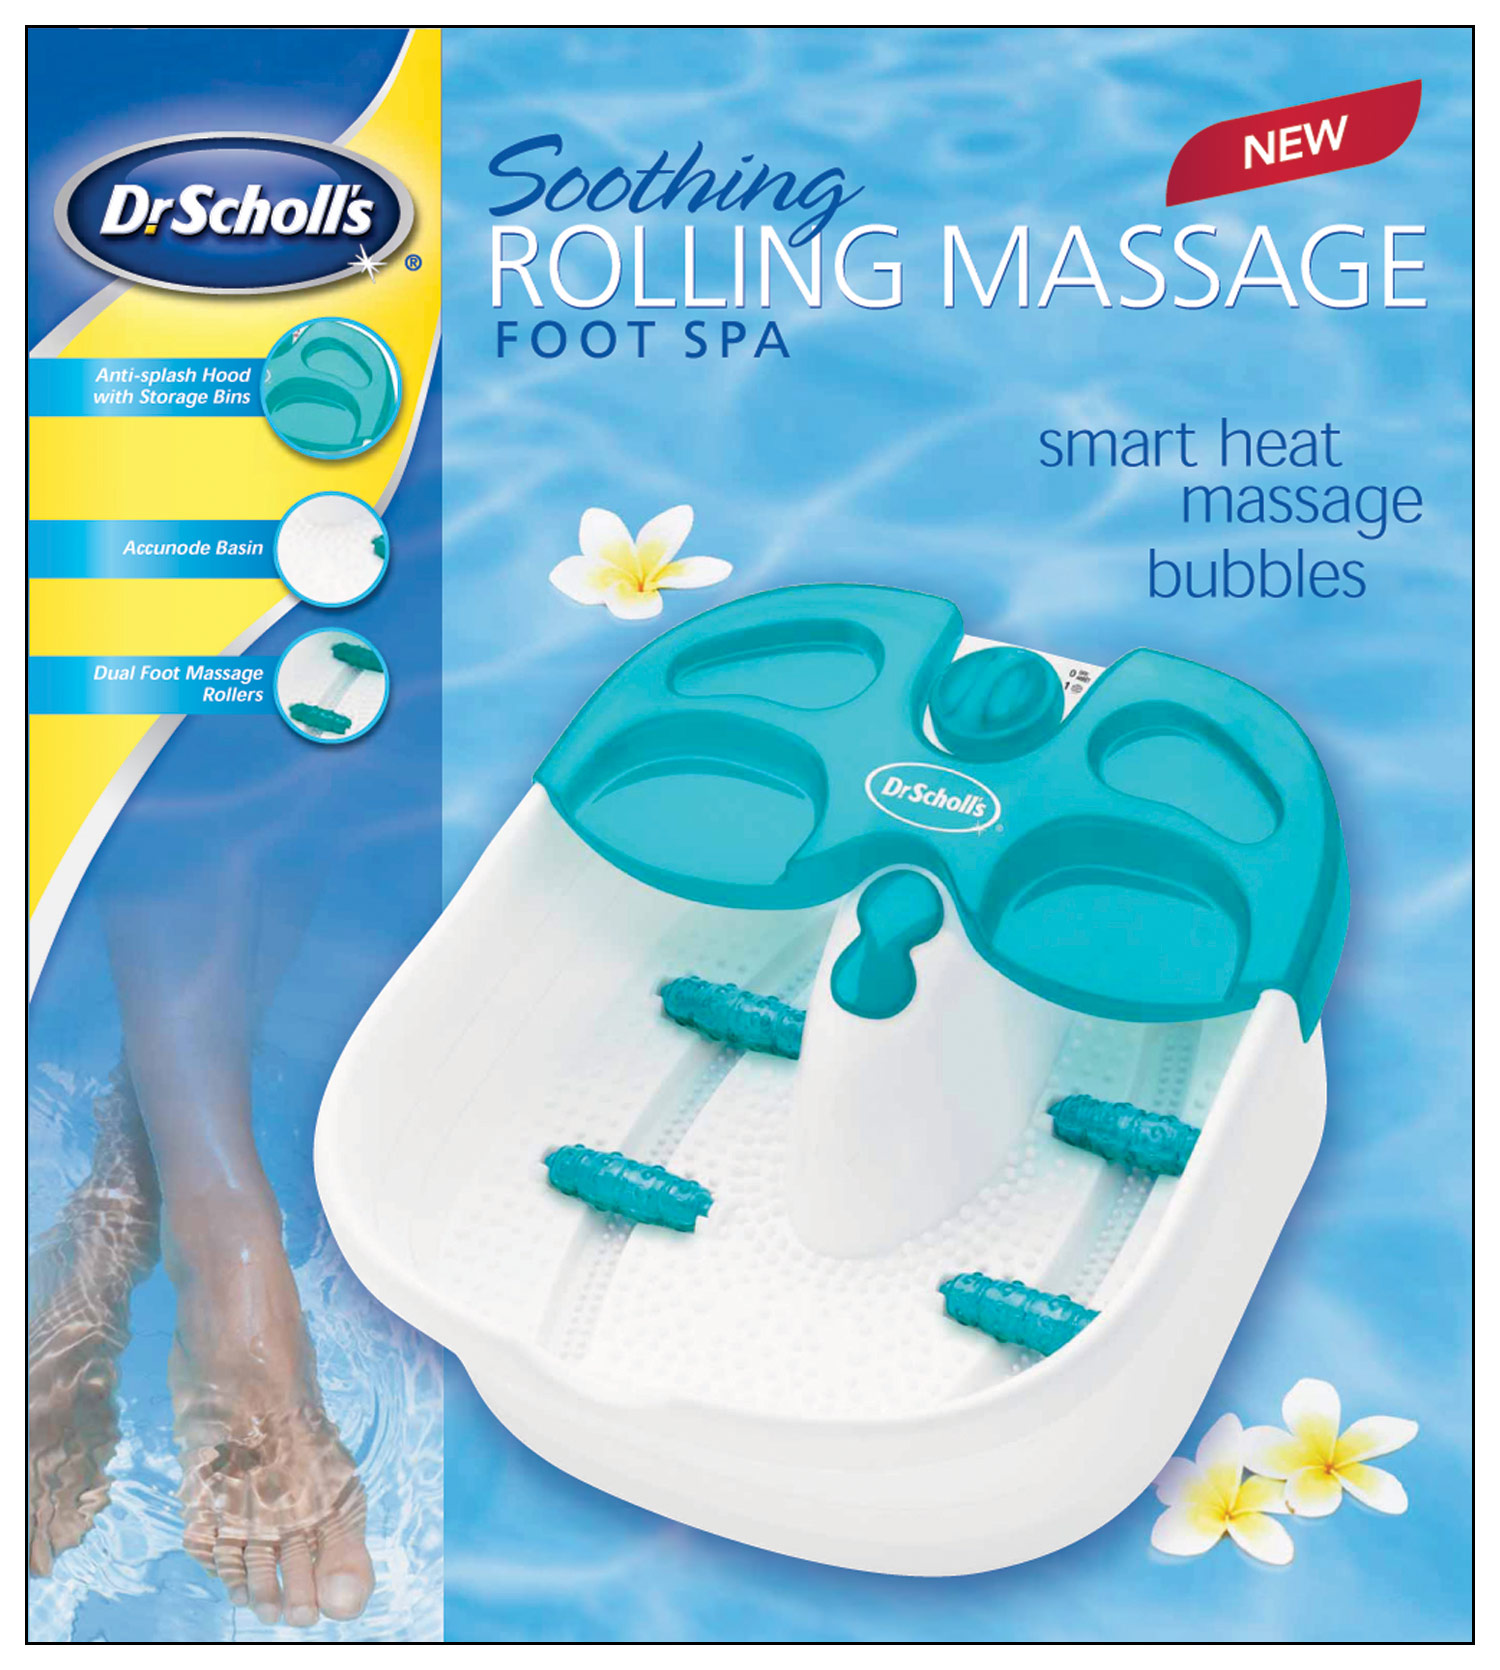 Dr. Scholl's Foot Paddle - Reviews